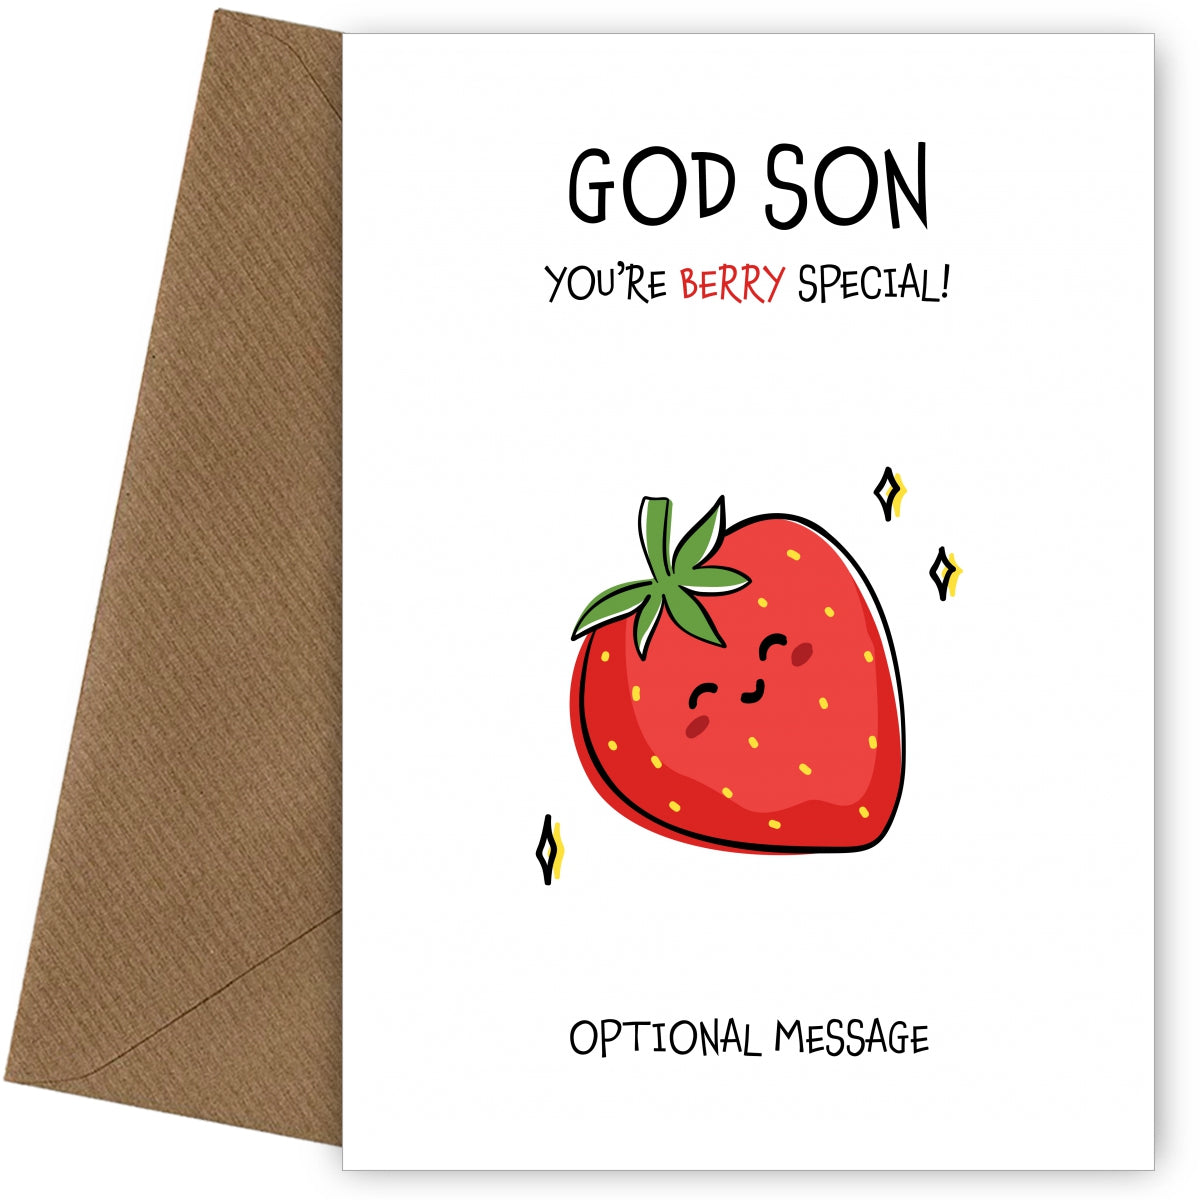 Fruit Pun Birthday Day Card for God Son - Berry Special